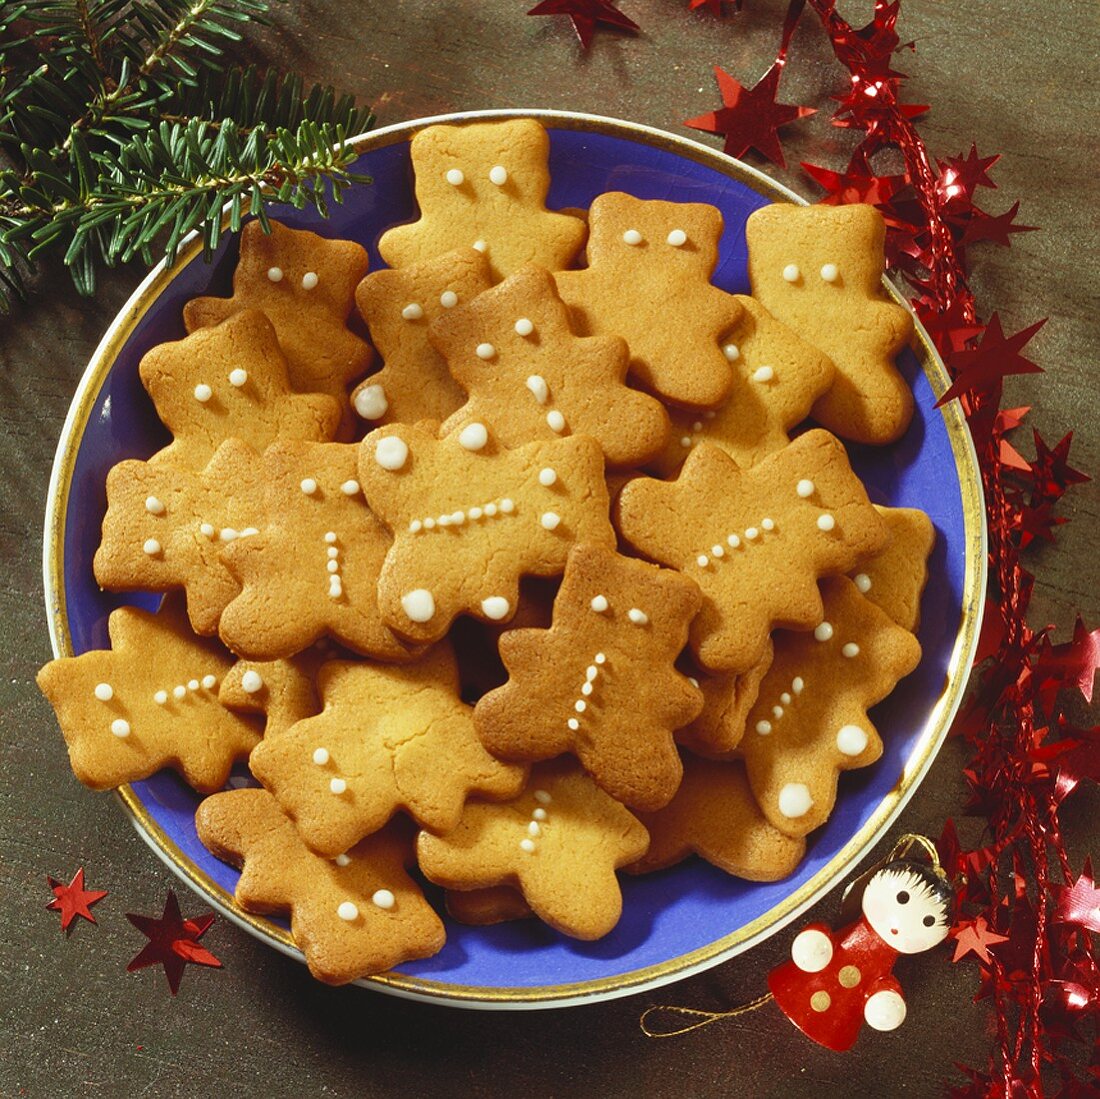 Braune Kuchen (biscuits) in the shape of bears